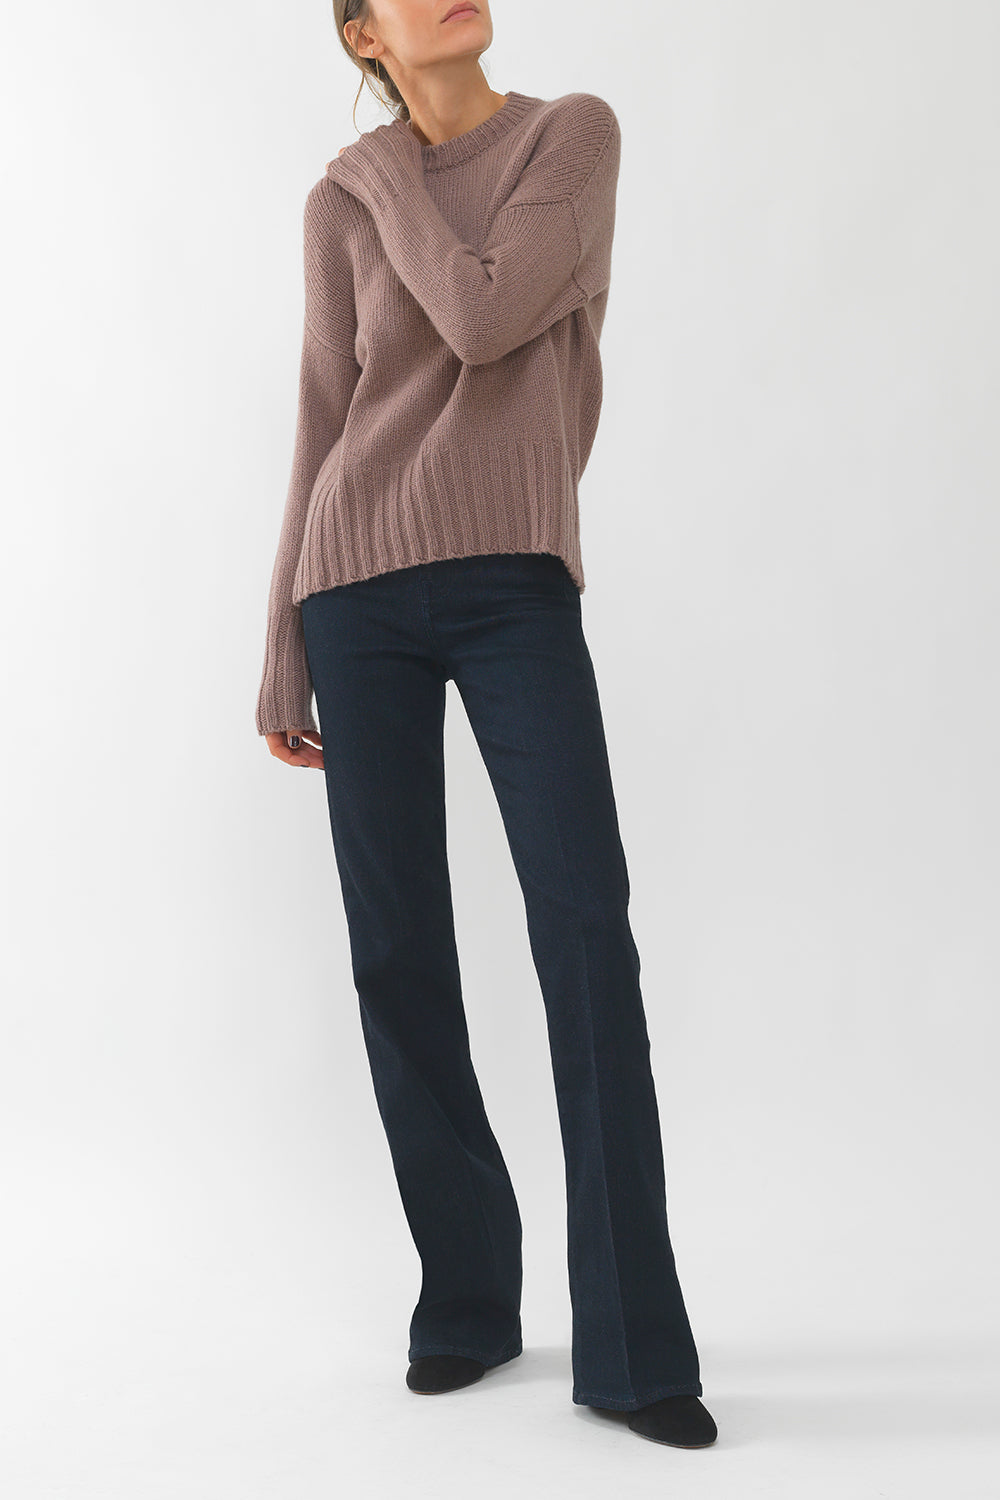 Cashmere Long-Sleeved Pullover with Crewneck - hibiscus - worn